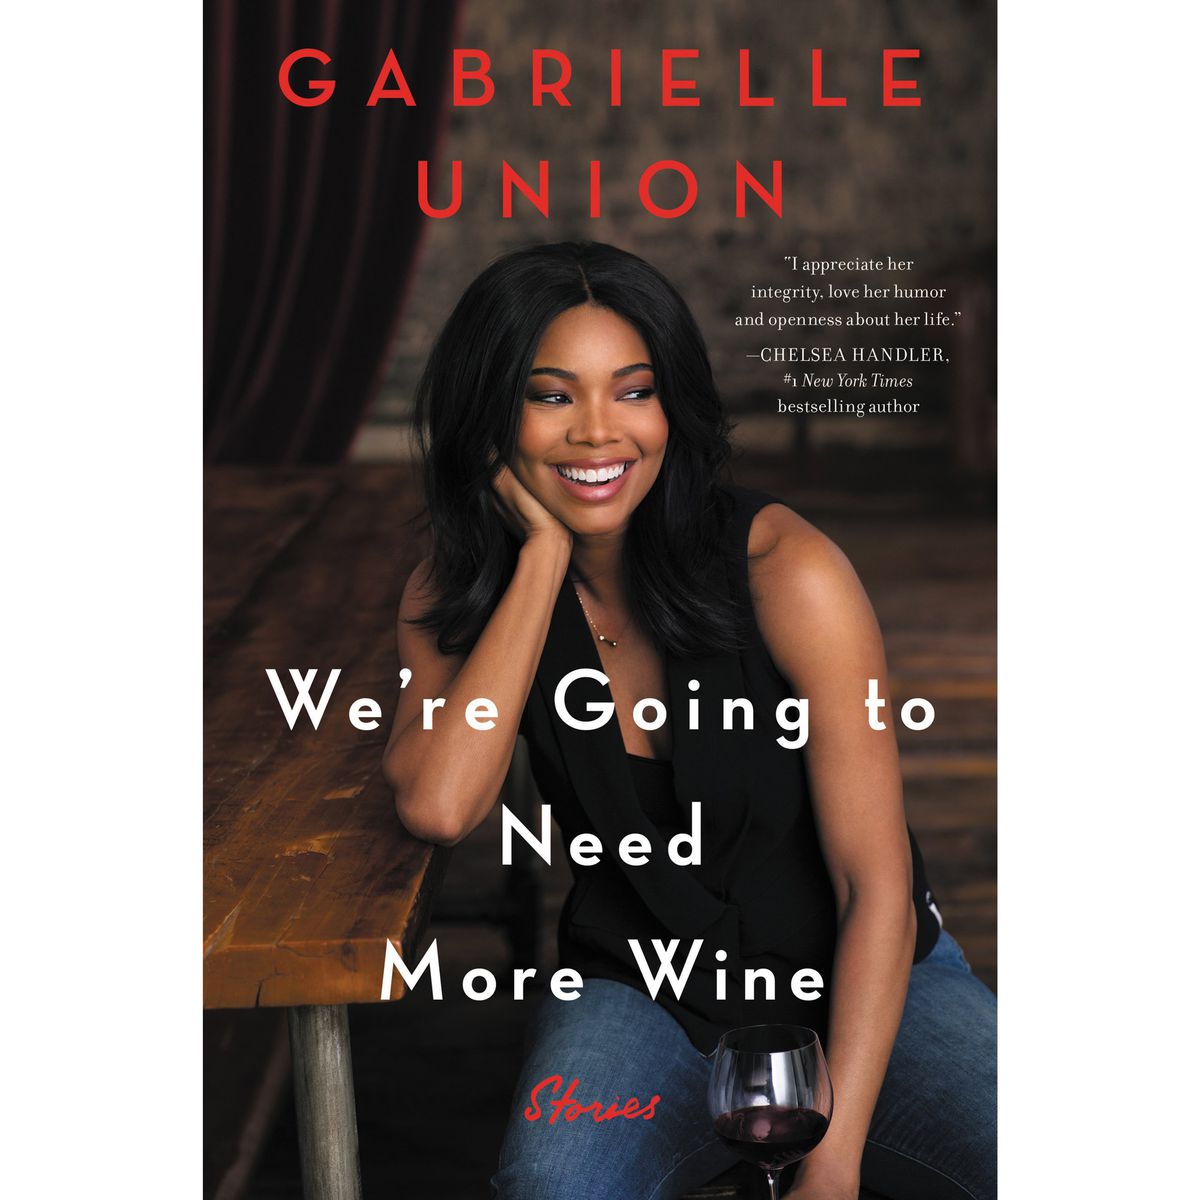 WE'RE GOING TO NEED MORE WINE BY GABRIELLE UNION